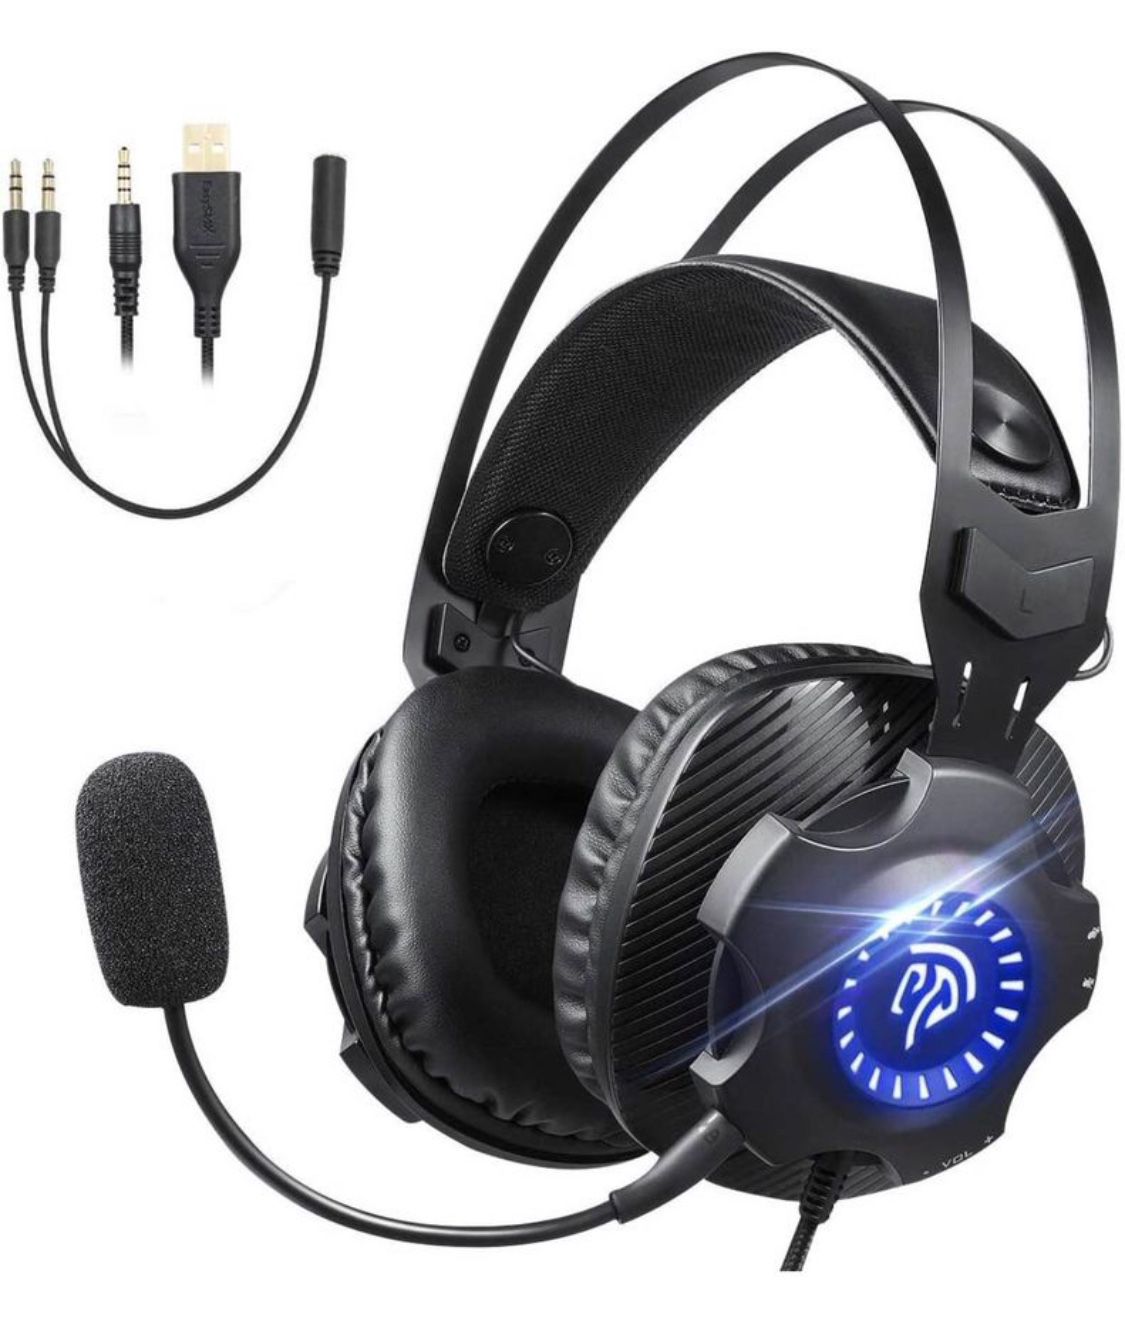 New! Gaming Headset with Microphone, Gaming Headphones PS4 Headset PC Headphones with RGB Light Noise Canceling Ear Headphones for PS4/iPad/Xbox One/X